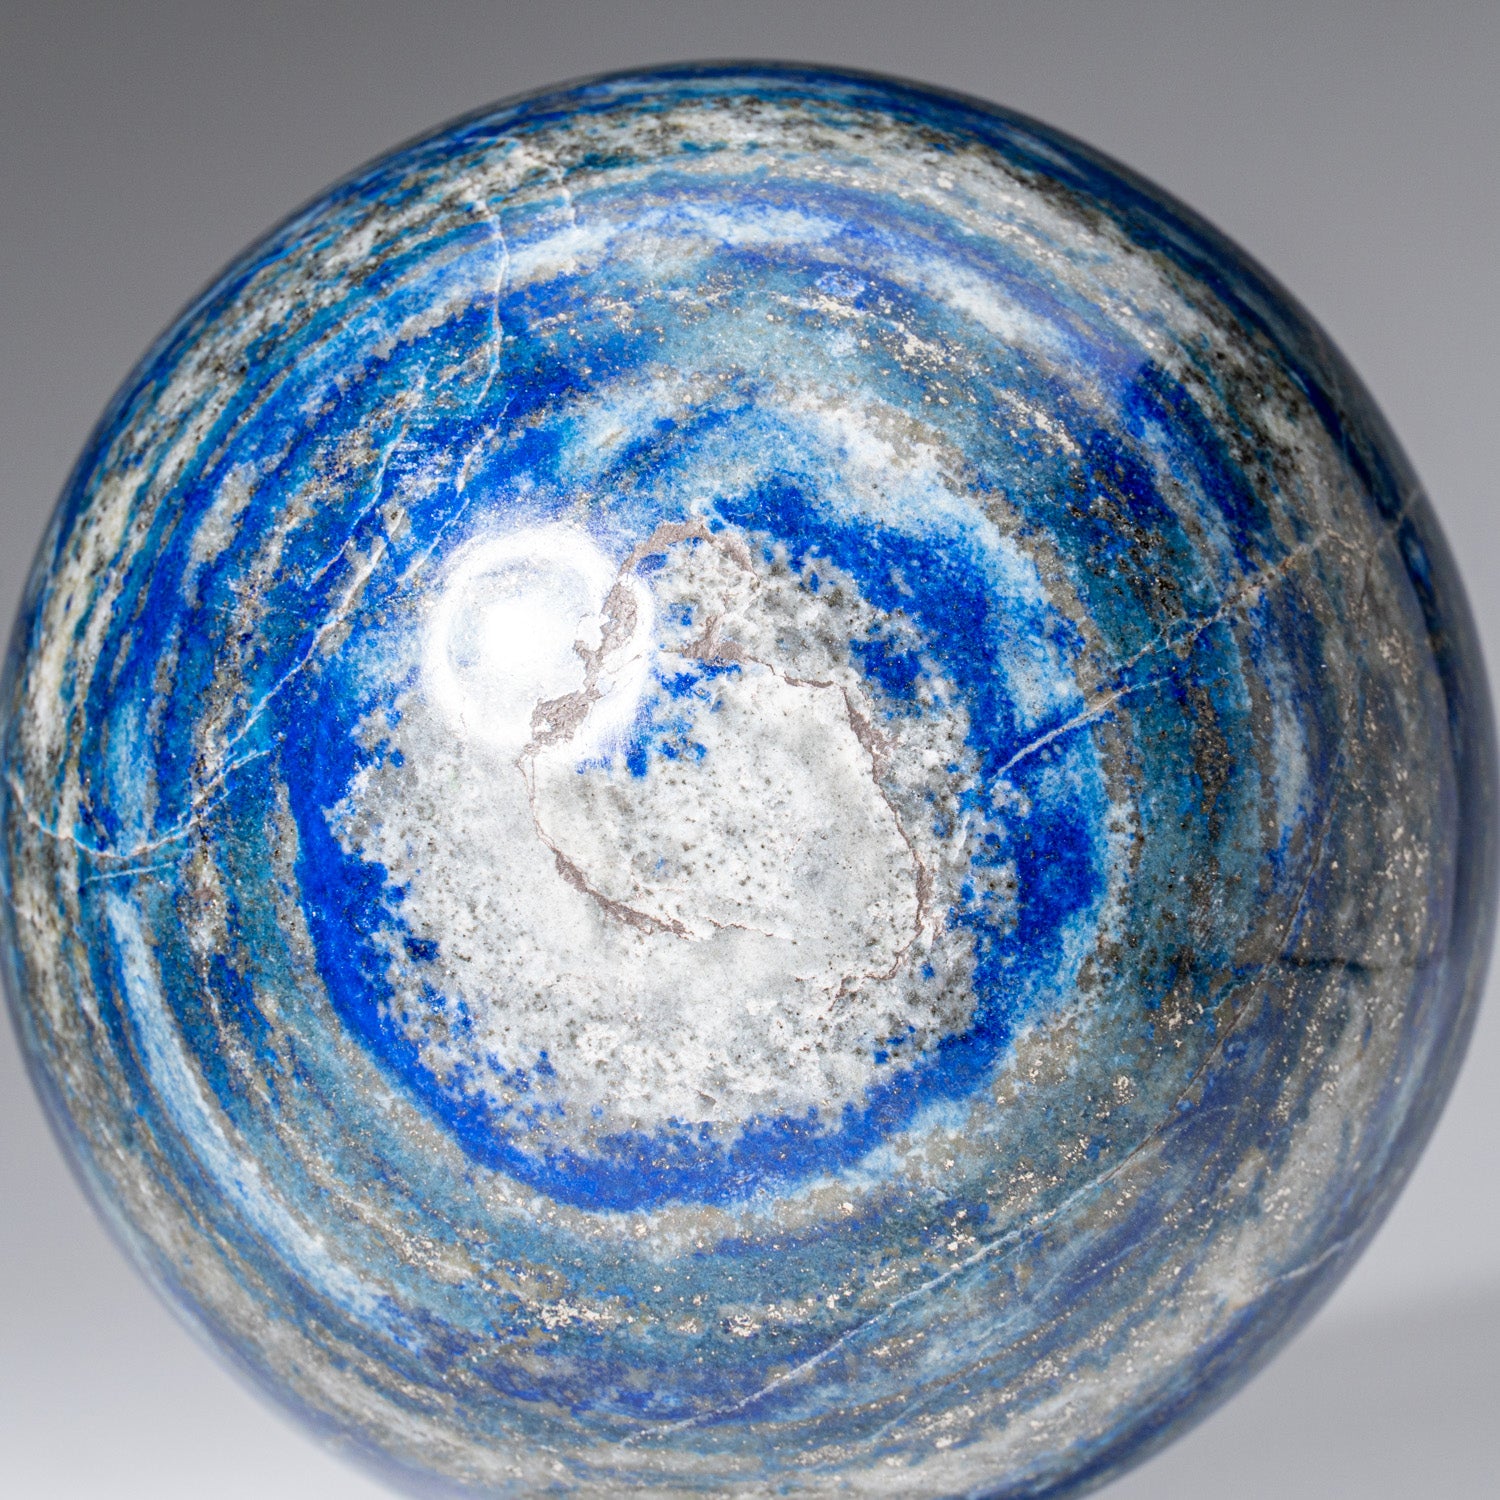 Polished Lapis Lazuli Sphere from Afghanistan (4", 3.5 lbs)